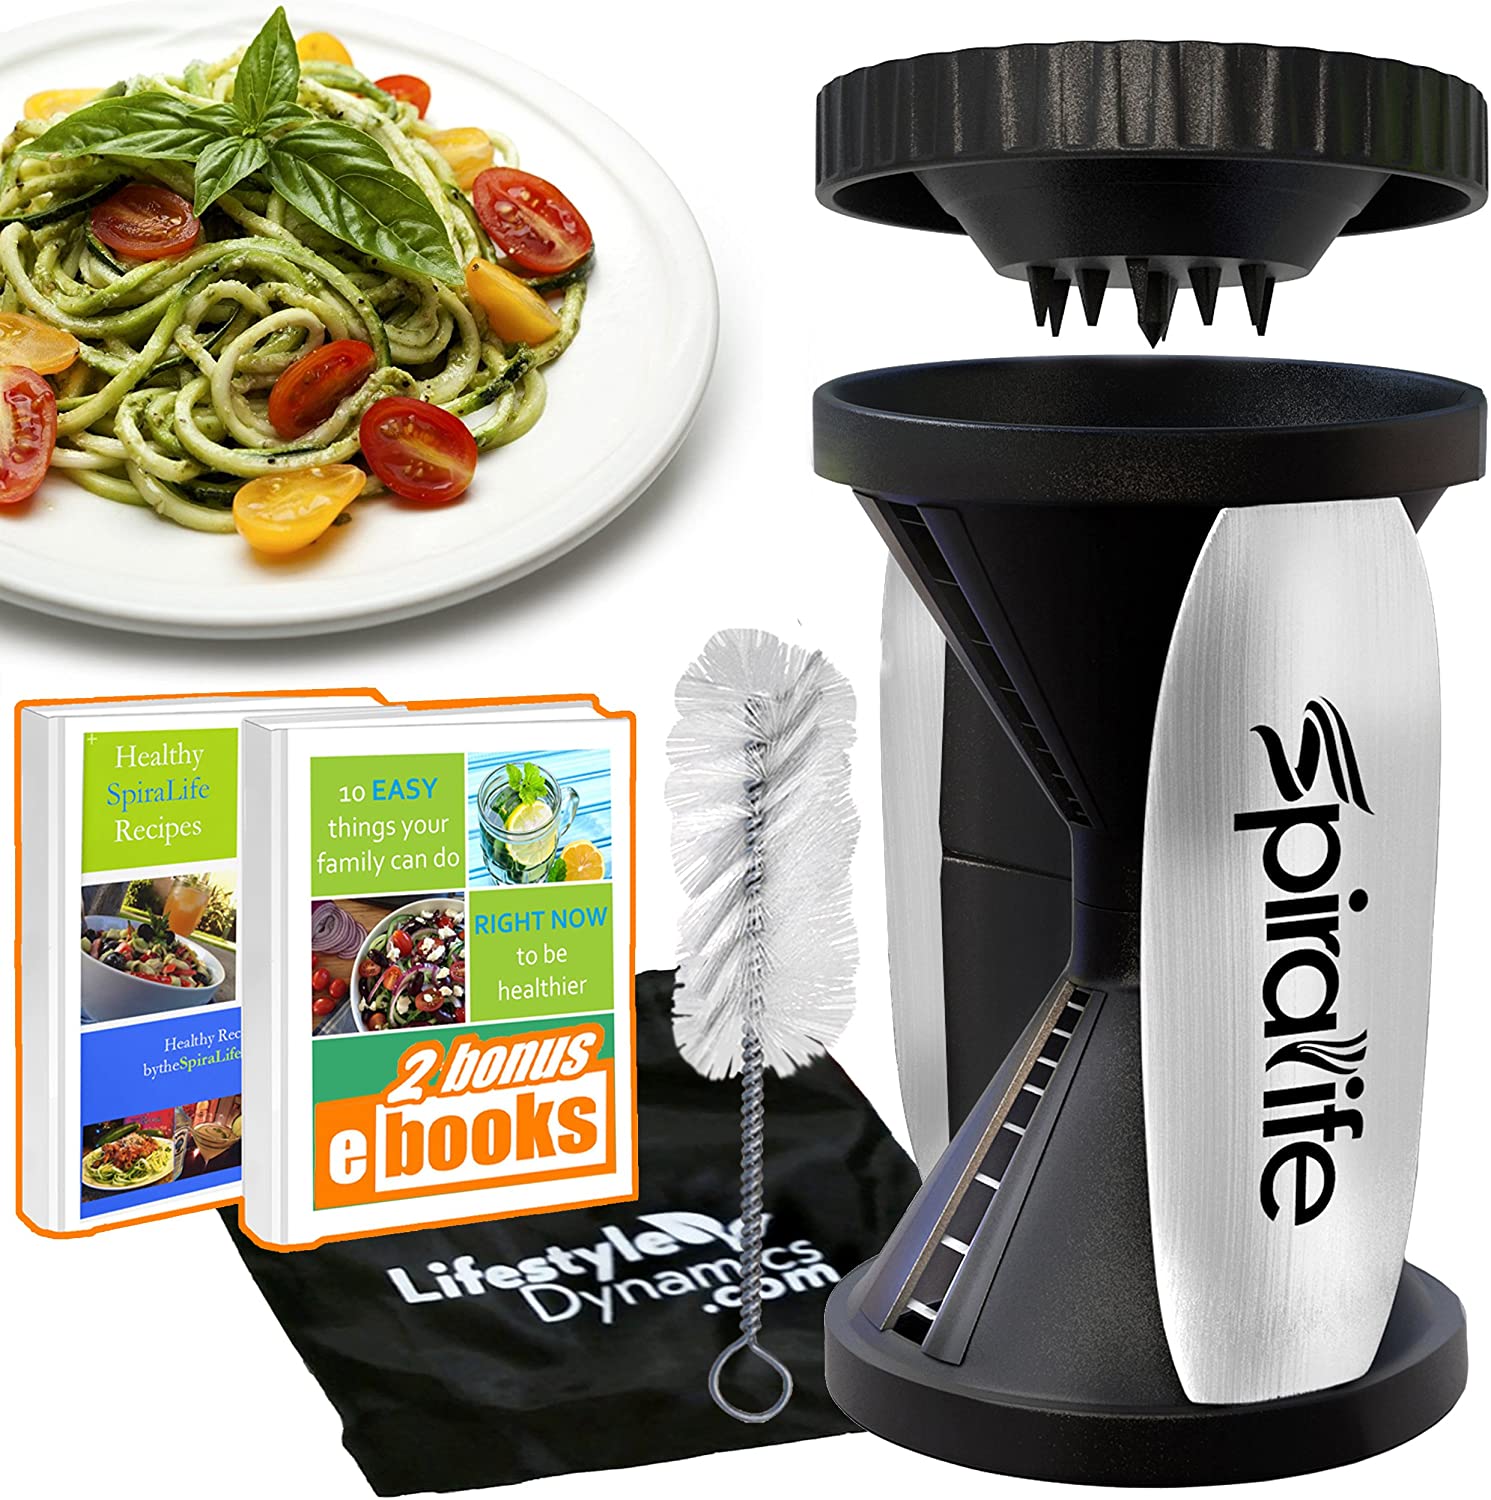 Noodle Maker Complete 7-Blade Zucchini Spaghetti Maker Set w/ 10 Recipe Book Included by Dimrom Vegetable Spiralizer Ultra-Sharp Blades Veggie Spiral Slicer Slicer Powerful Suction Cup 